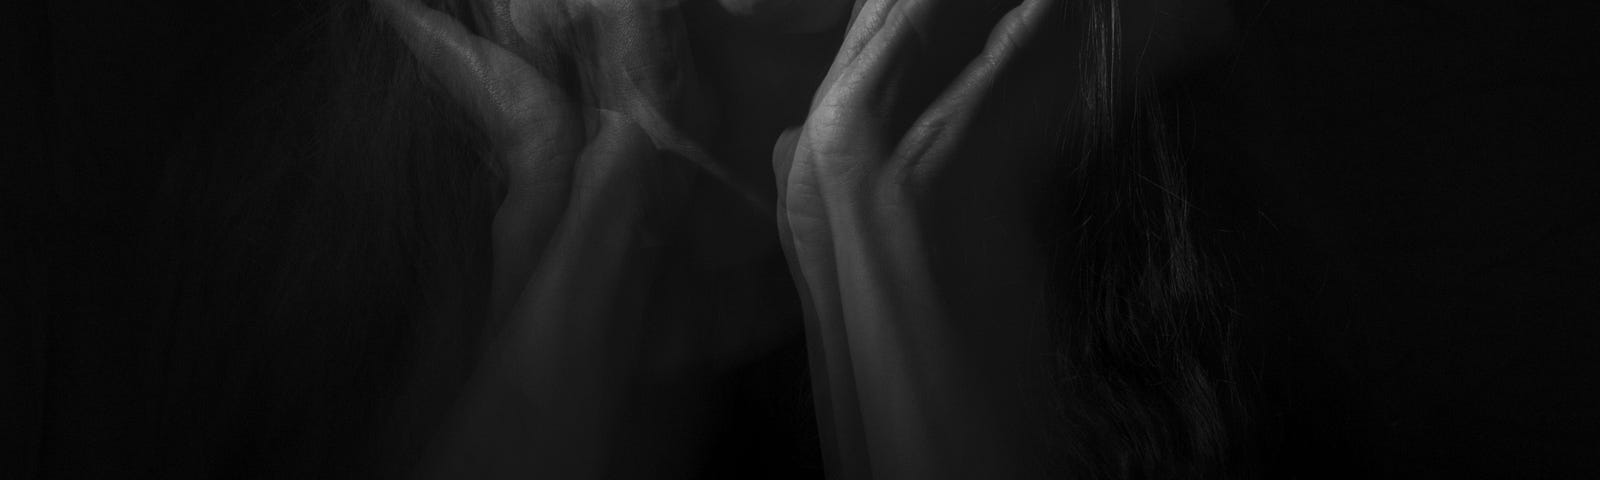 black and white image of woman screaming in abstract ghostly imagery